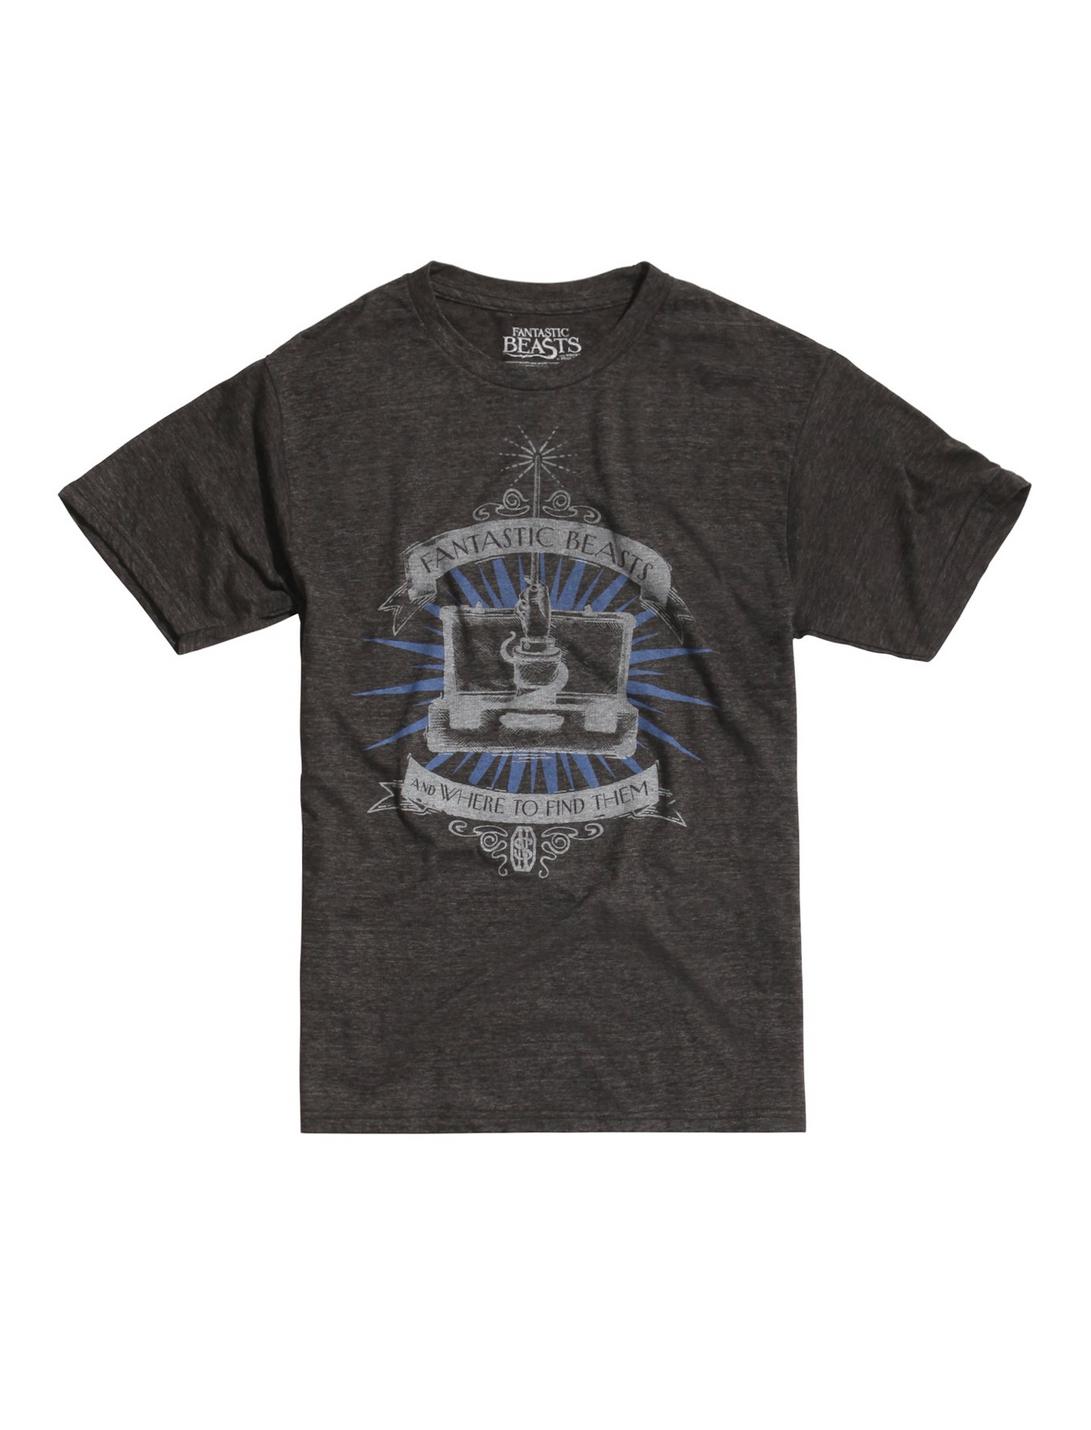 Fantastic Beasts And Where To Find Them Suitcase Tri-Blend T-Shirt, GREY, hi-res